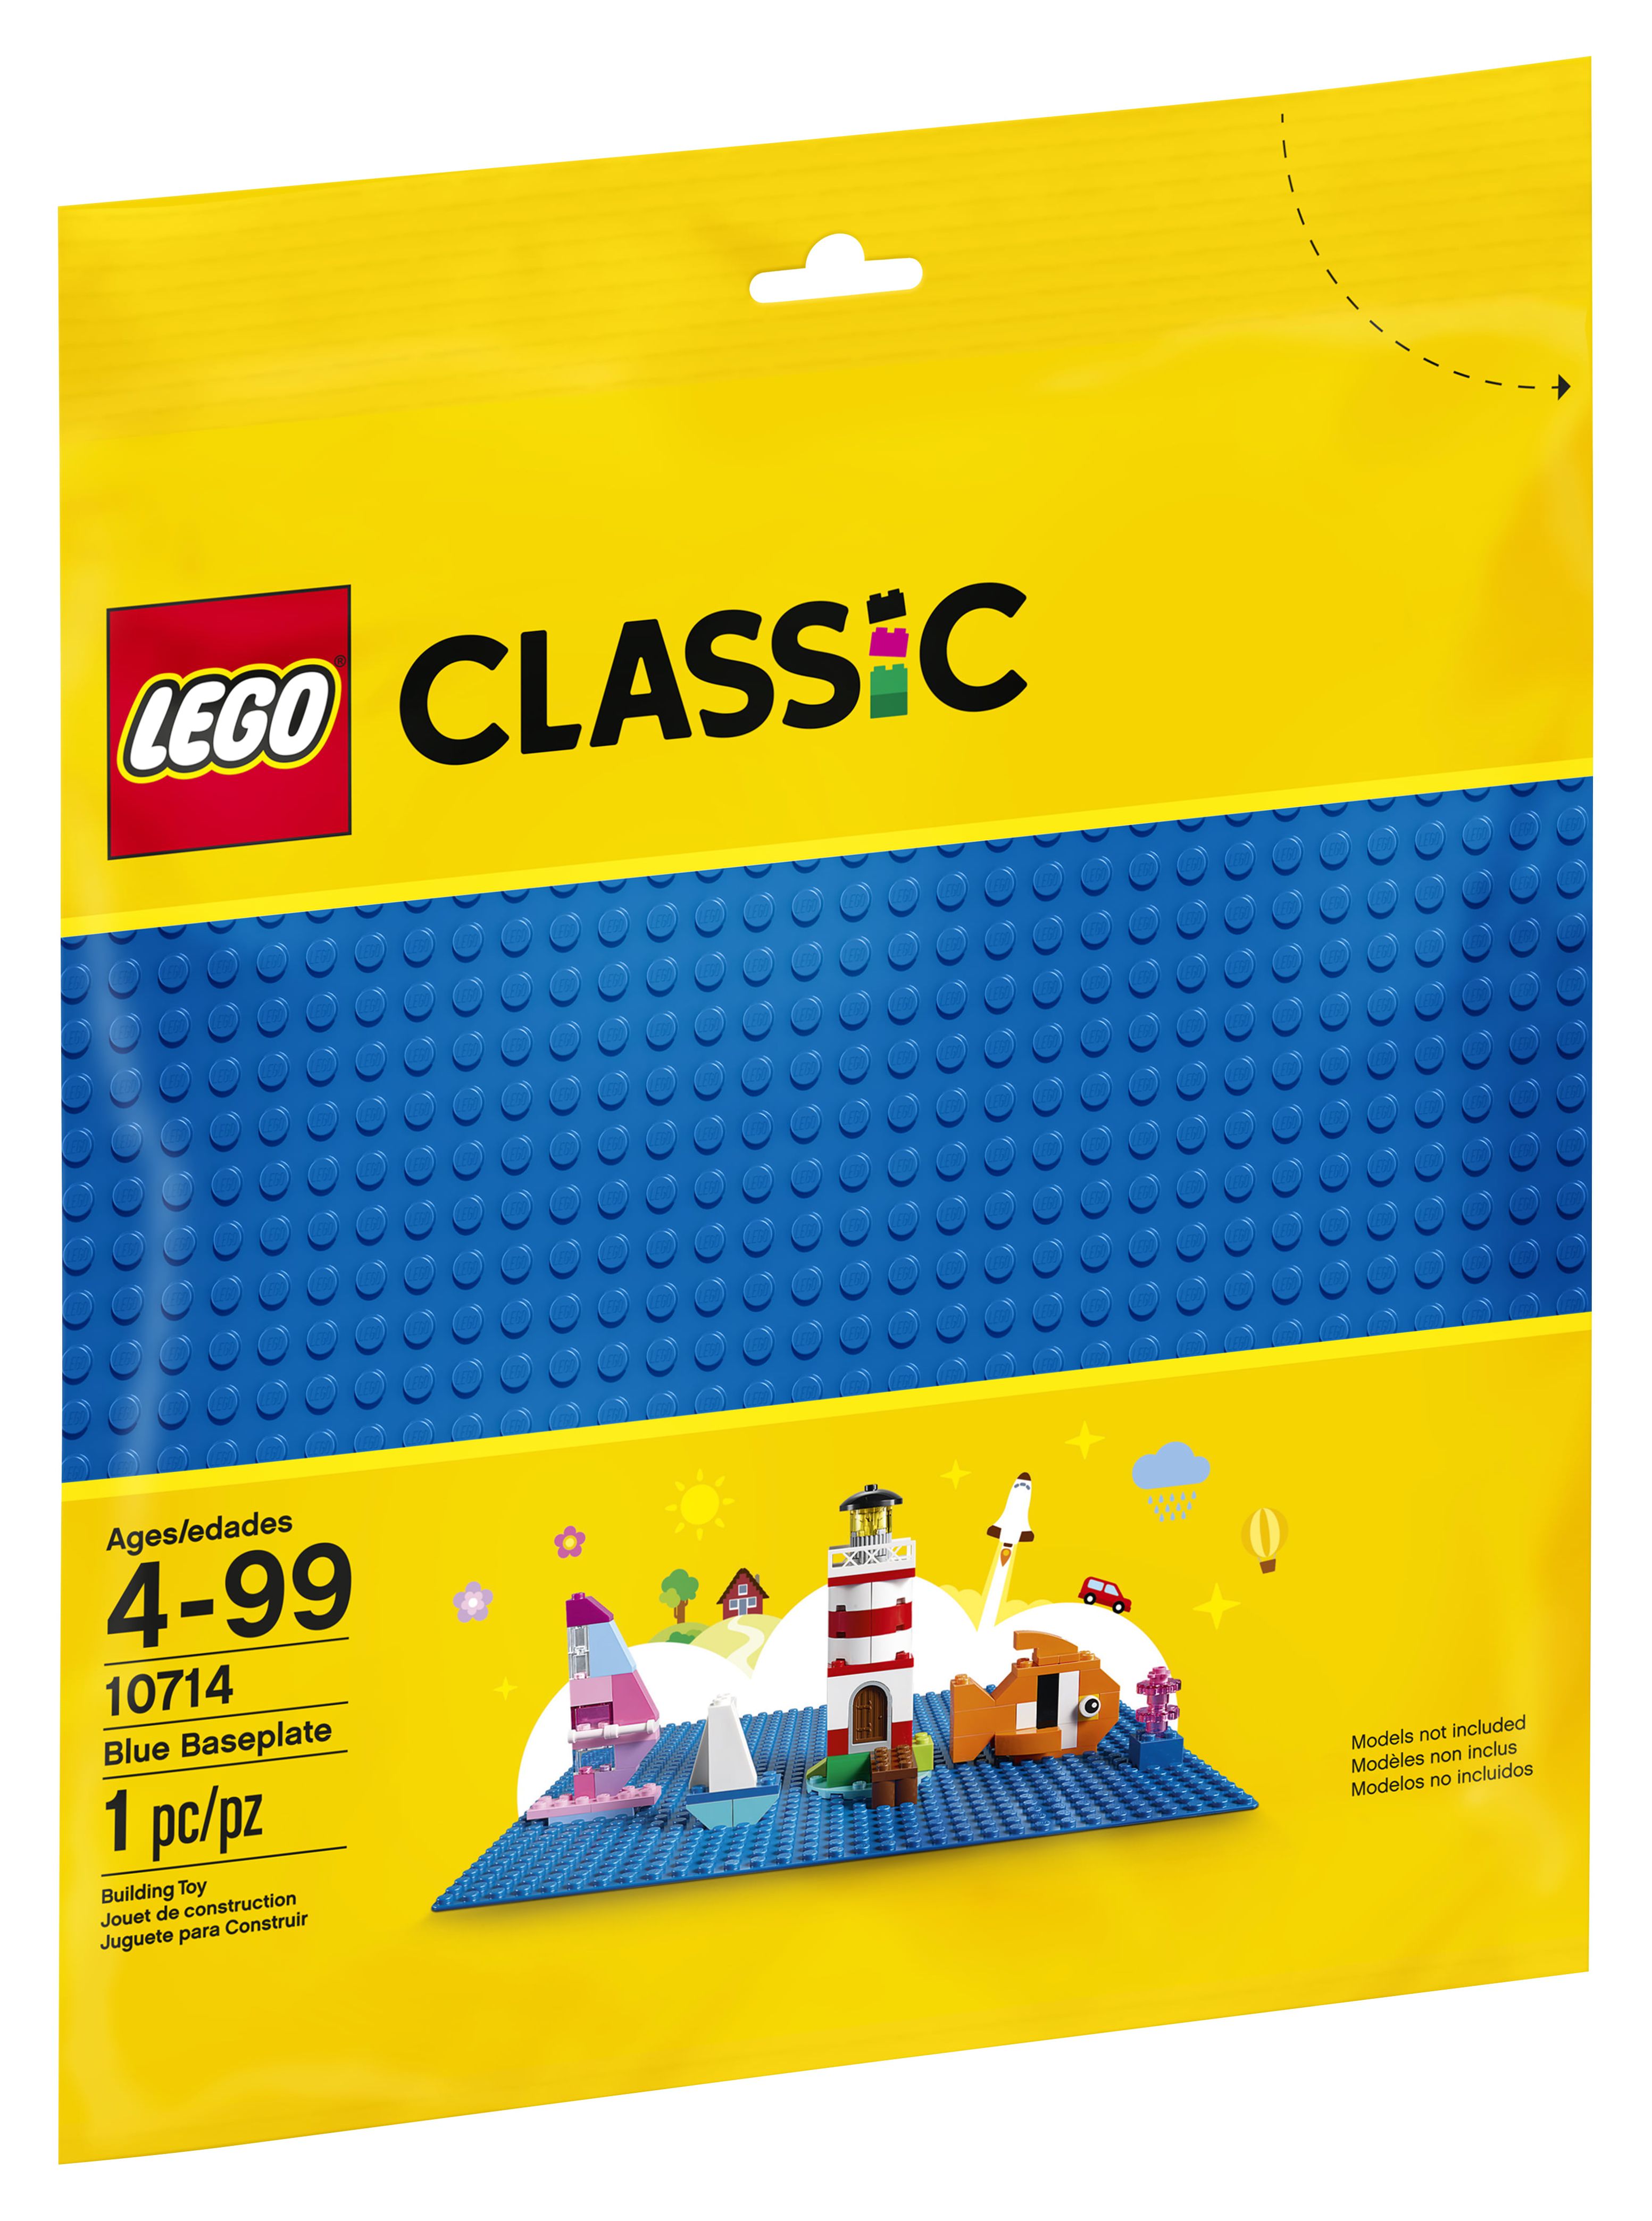 LEGO Classic Blue Baseplate 10714 Popular Toy Building Accessory - image 4 of 10